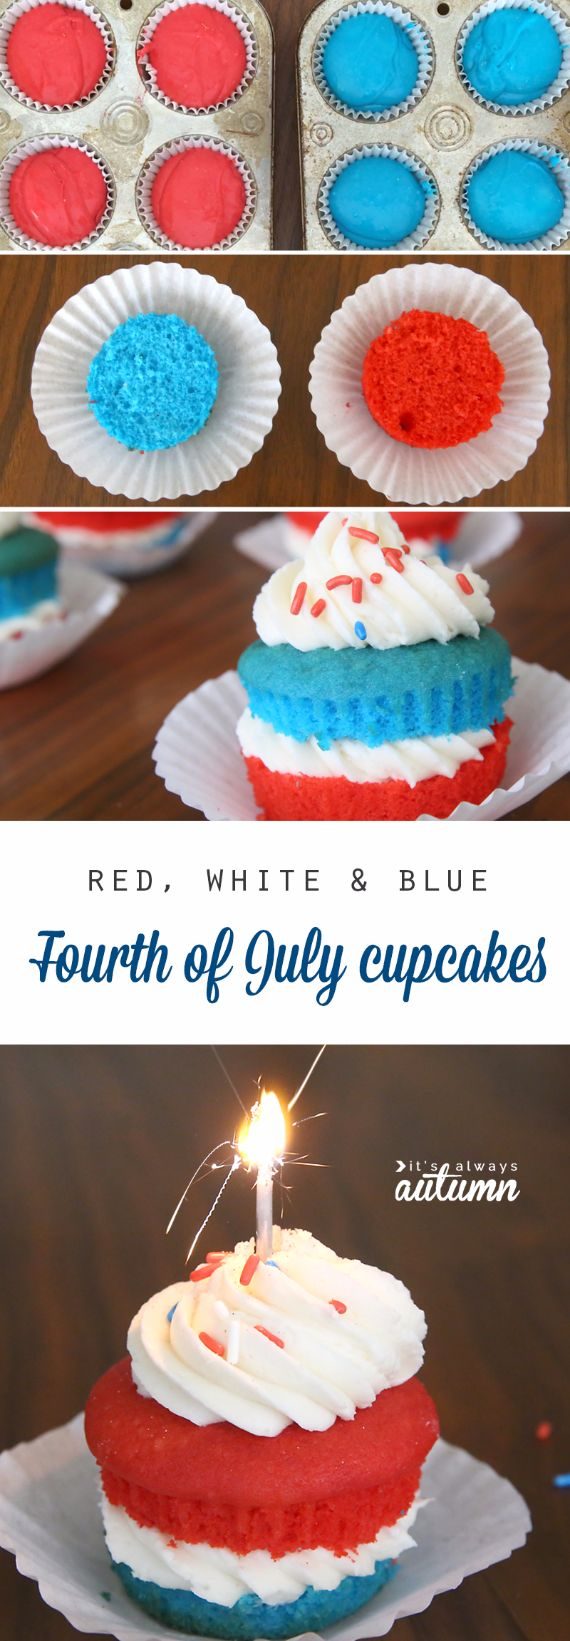 Independence Day Cakes and cupcaesCupcakes (19)